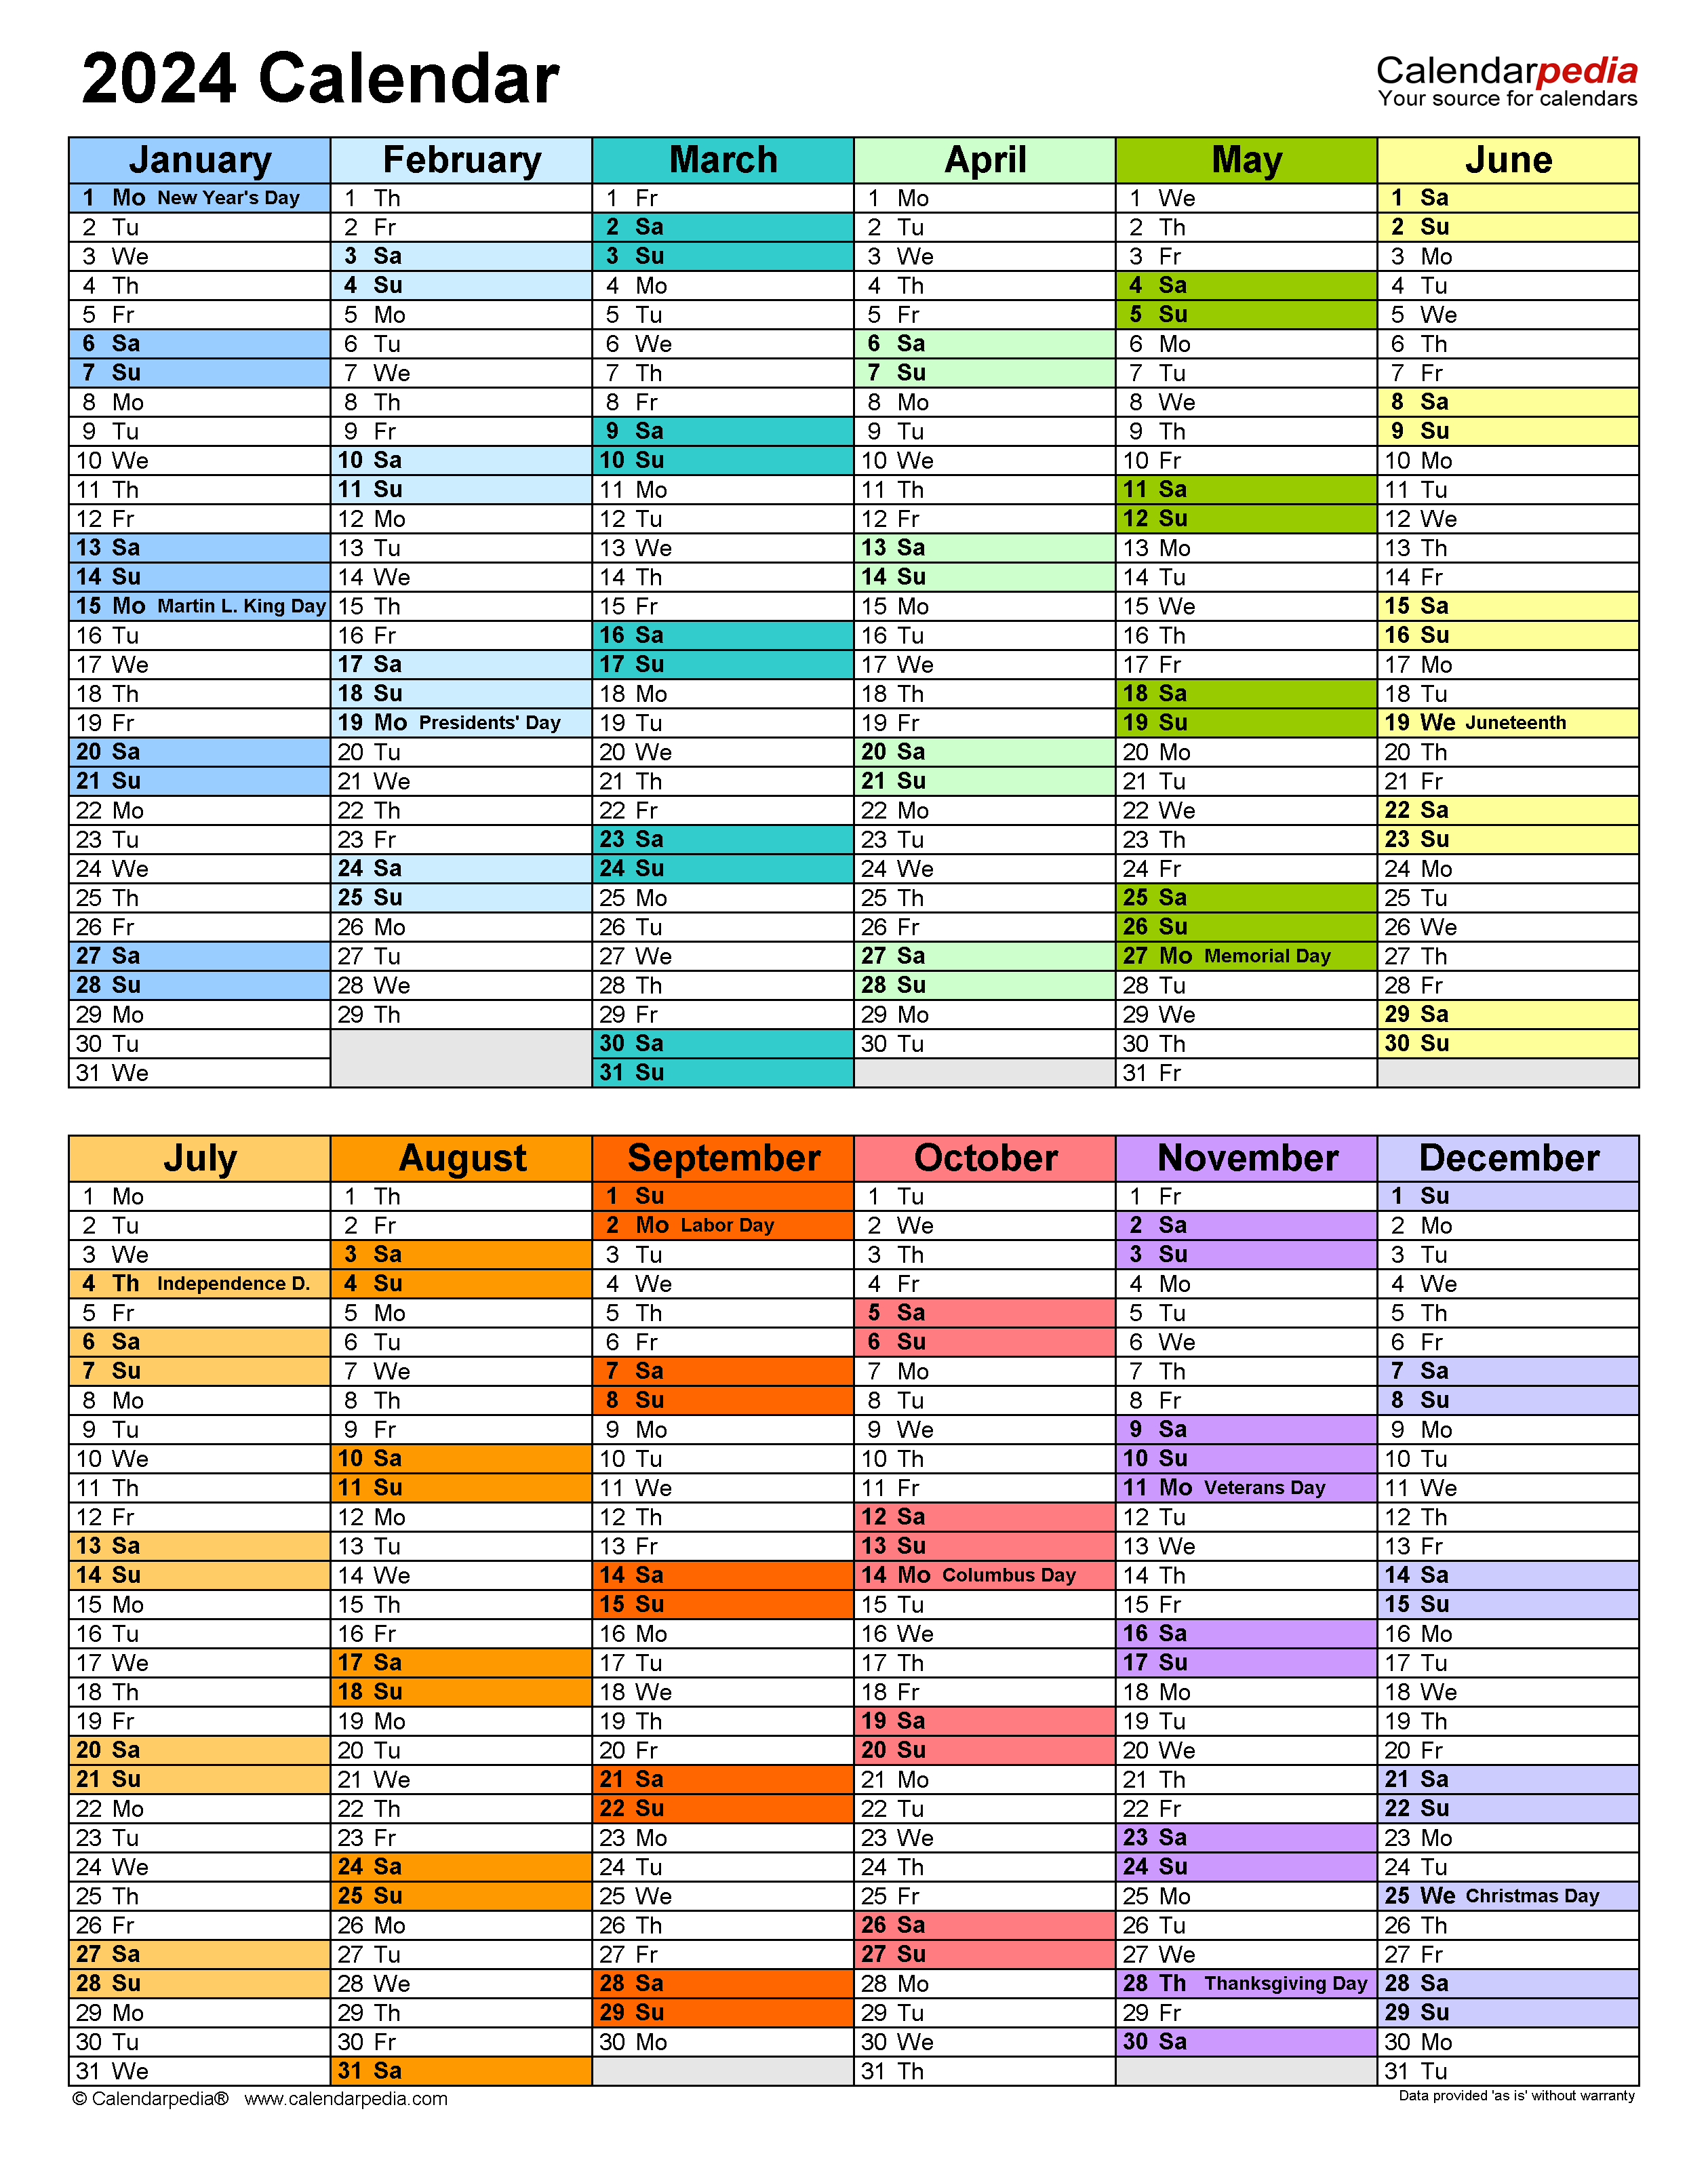 2024 Yearly Calendar Template Excel Free Printable Templates 2024 - Free Printable 2024 Excel Calendar